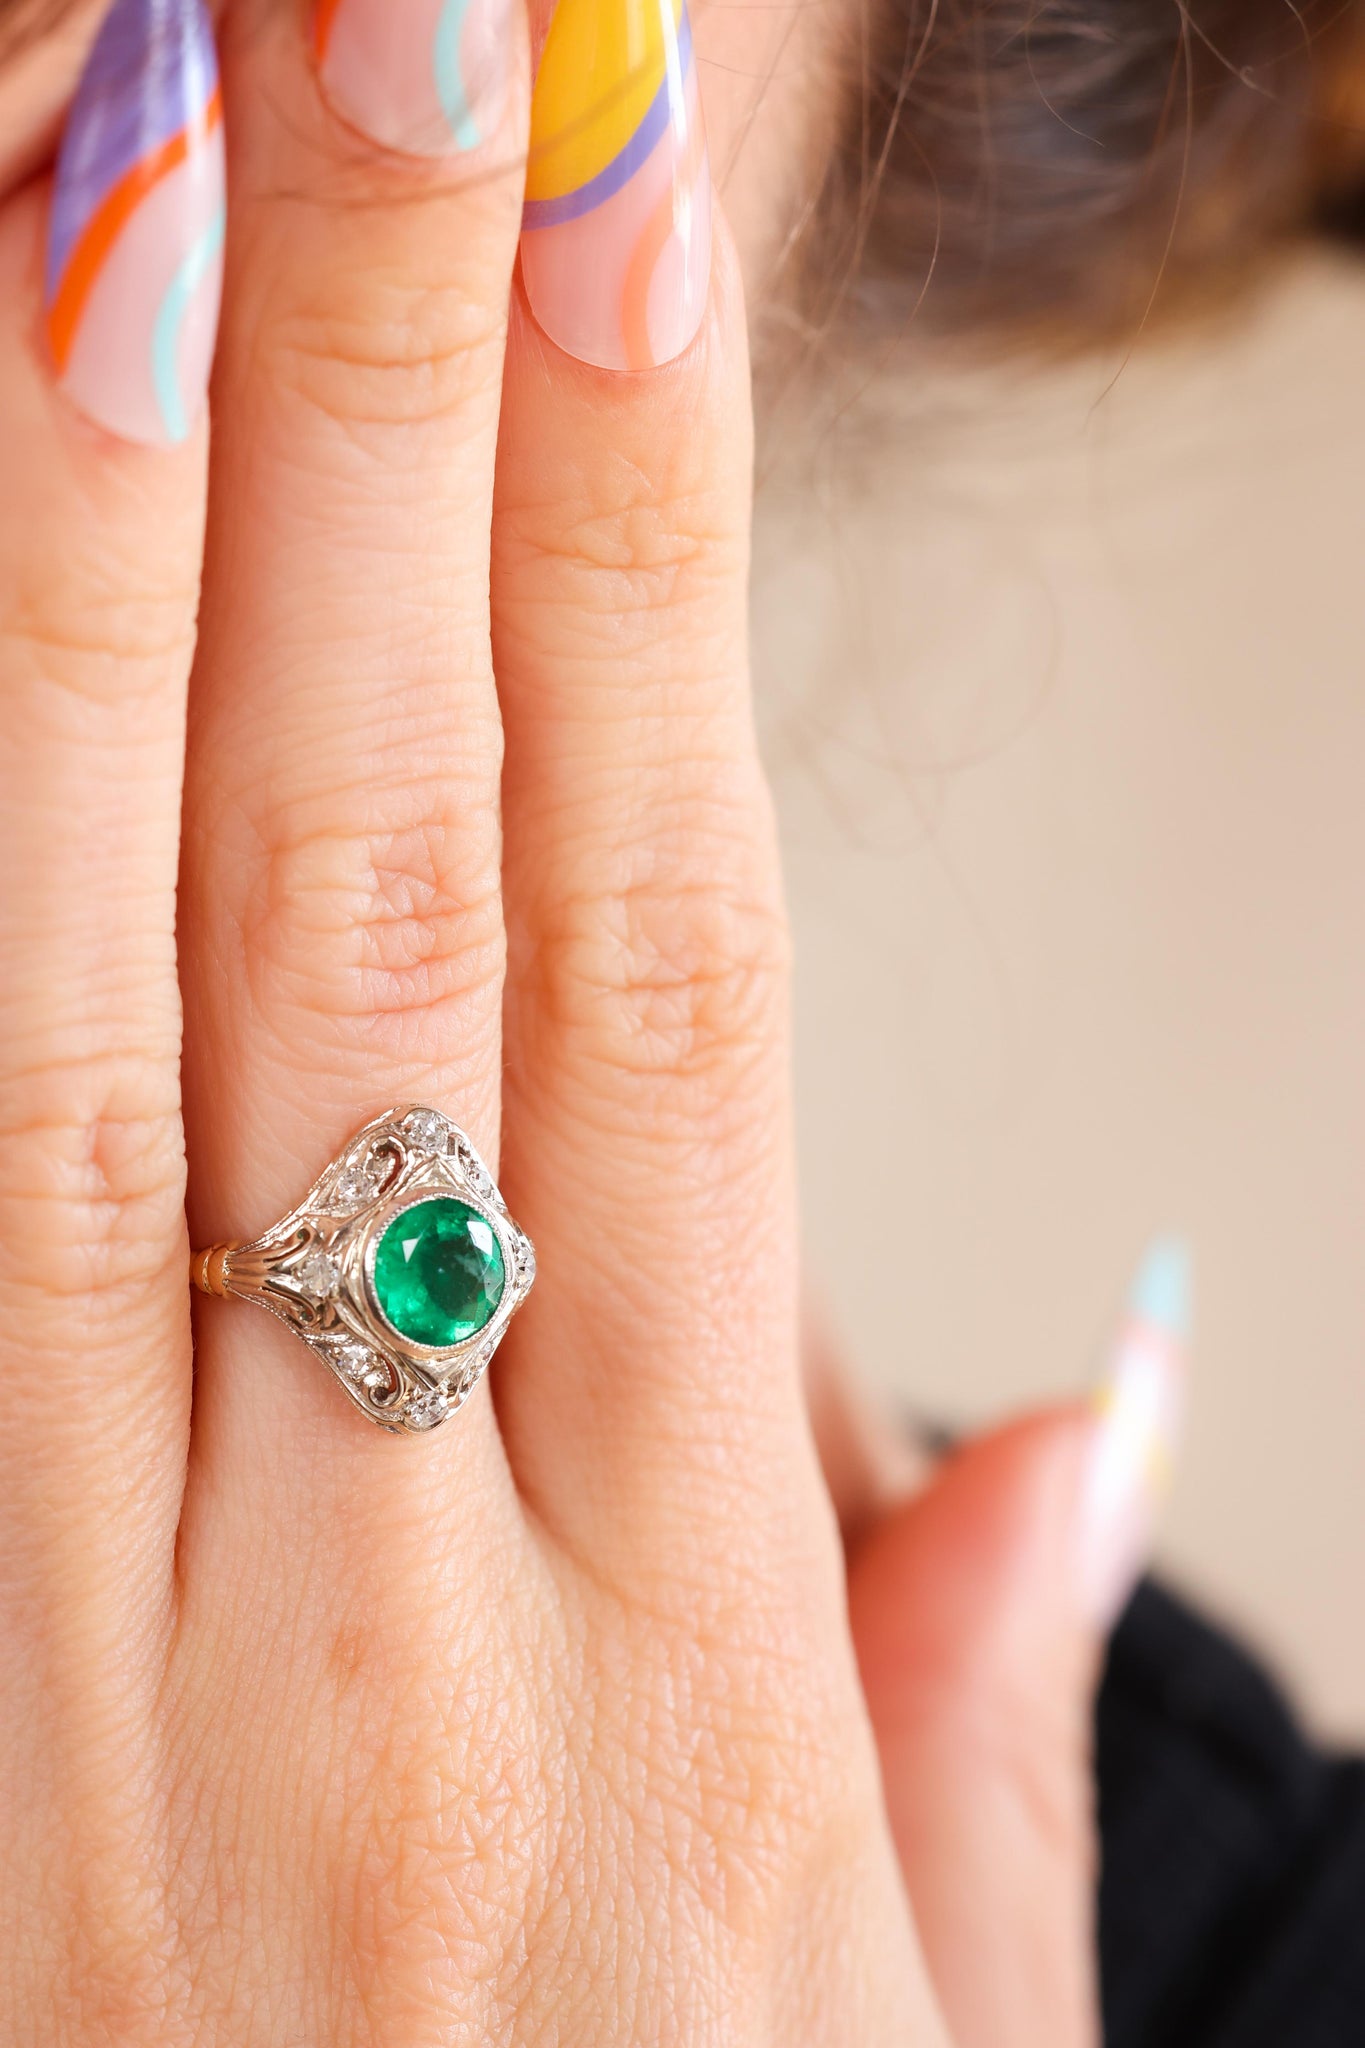 Emerald and Diamond Navette Ring